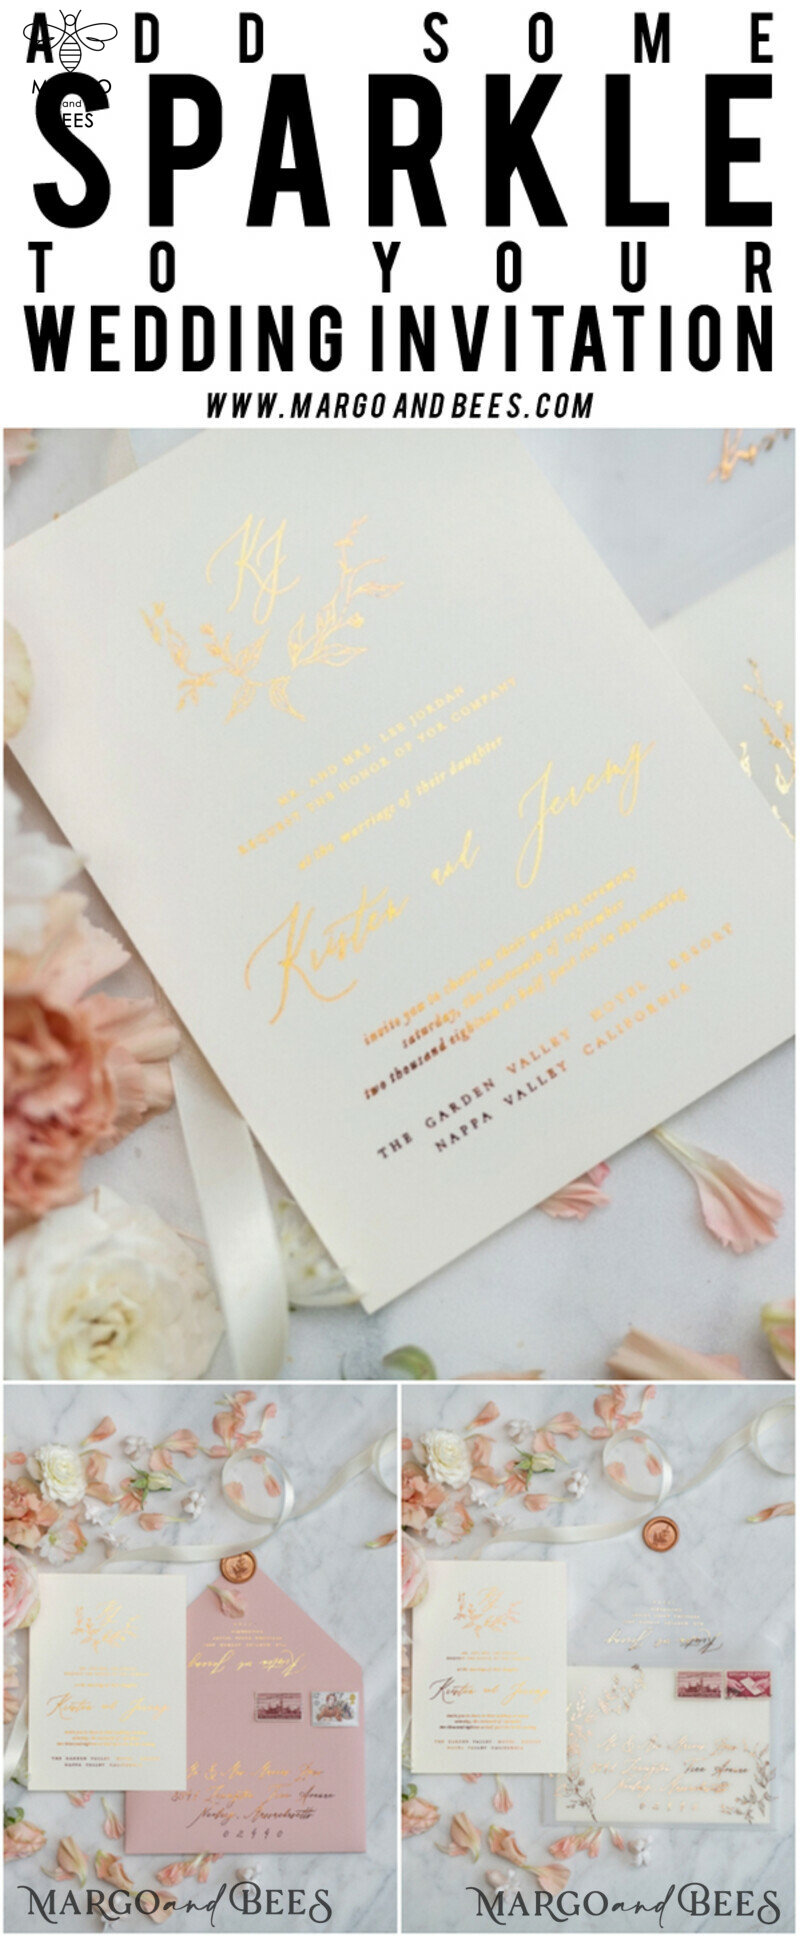 Bespoke Vellum Wedding Invitation Suite: Romantic Blush Pink and Glamour Gold Foil with Elegant Golden Touch-41